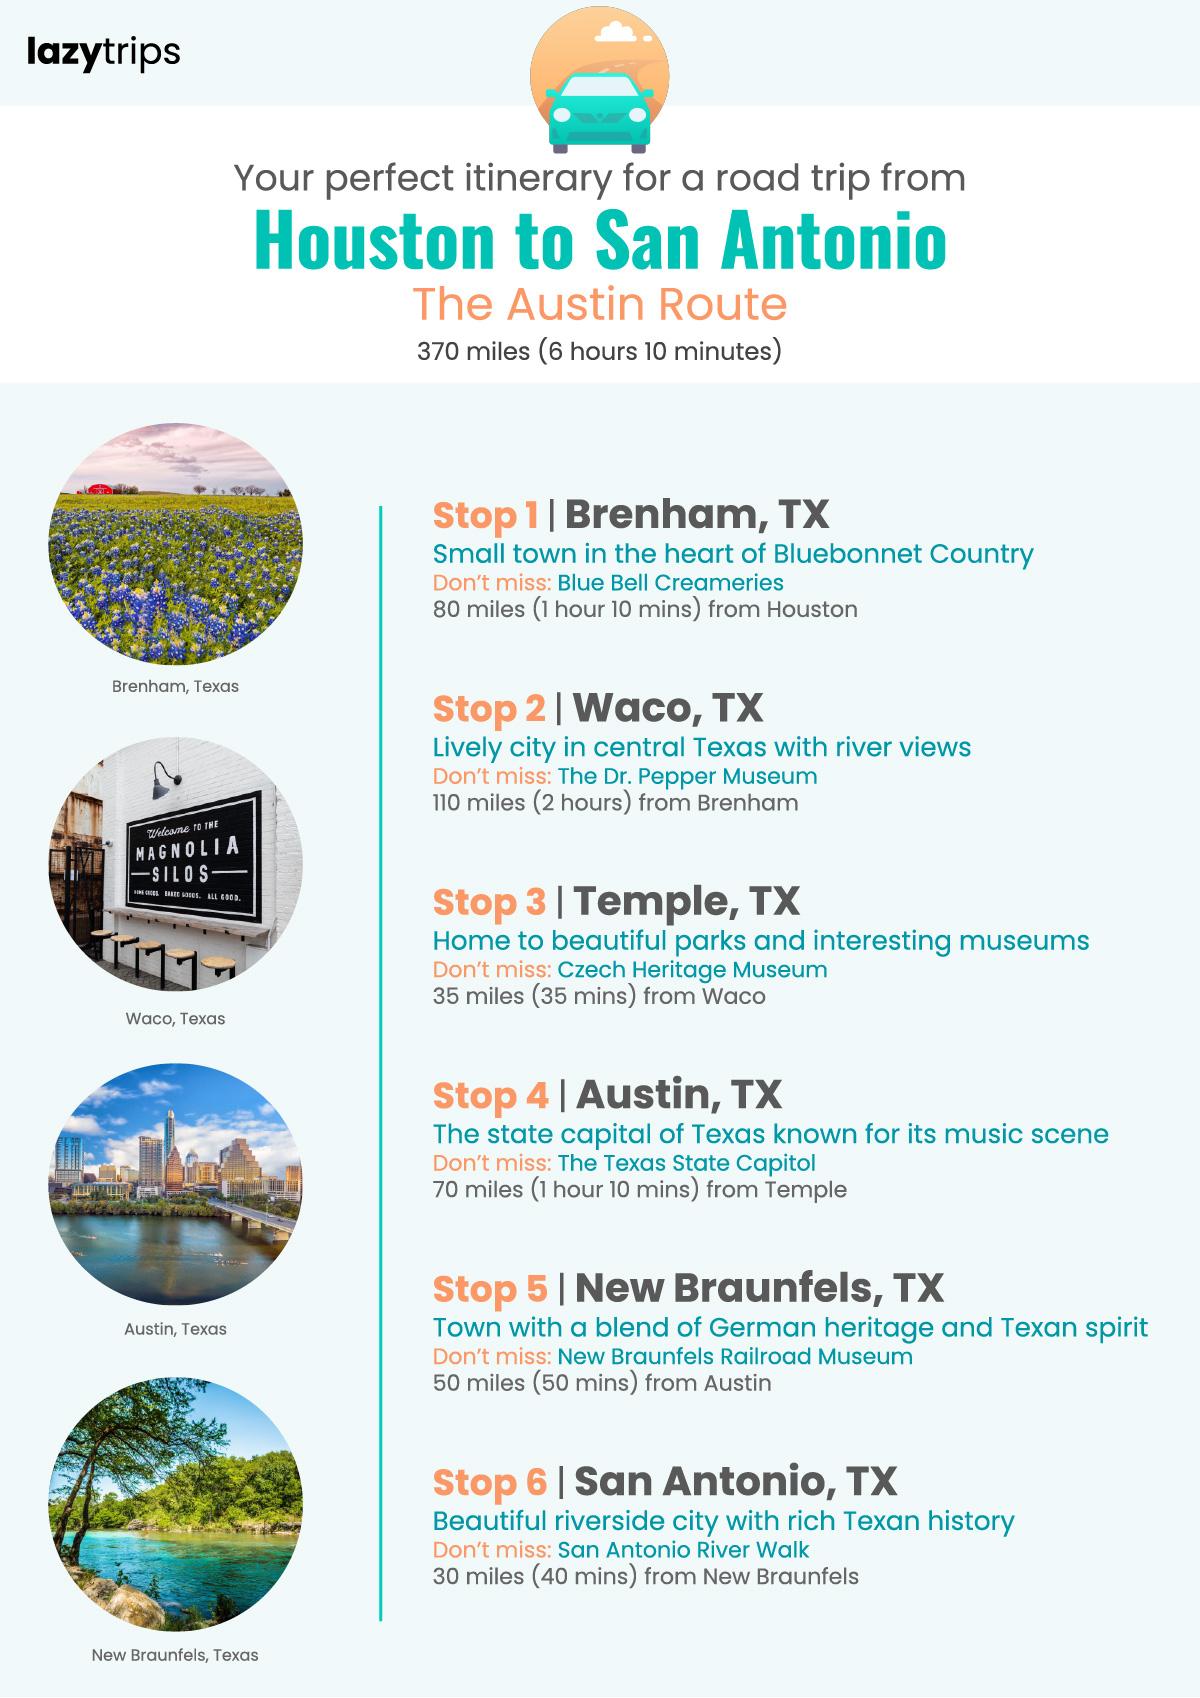 Itinerary for a road trip from Houston to San Antonio, stopping in Brenham, Waco, Temple, Austin, New Braunfels and San Antonio